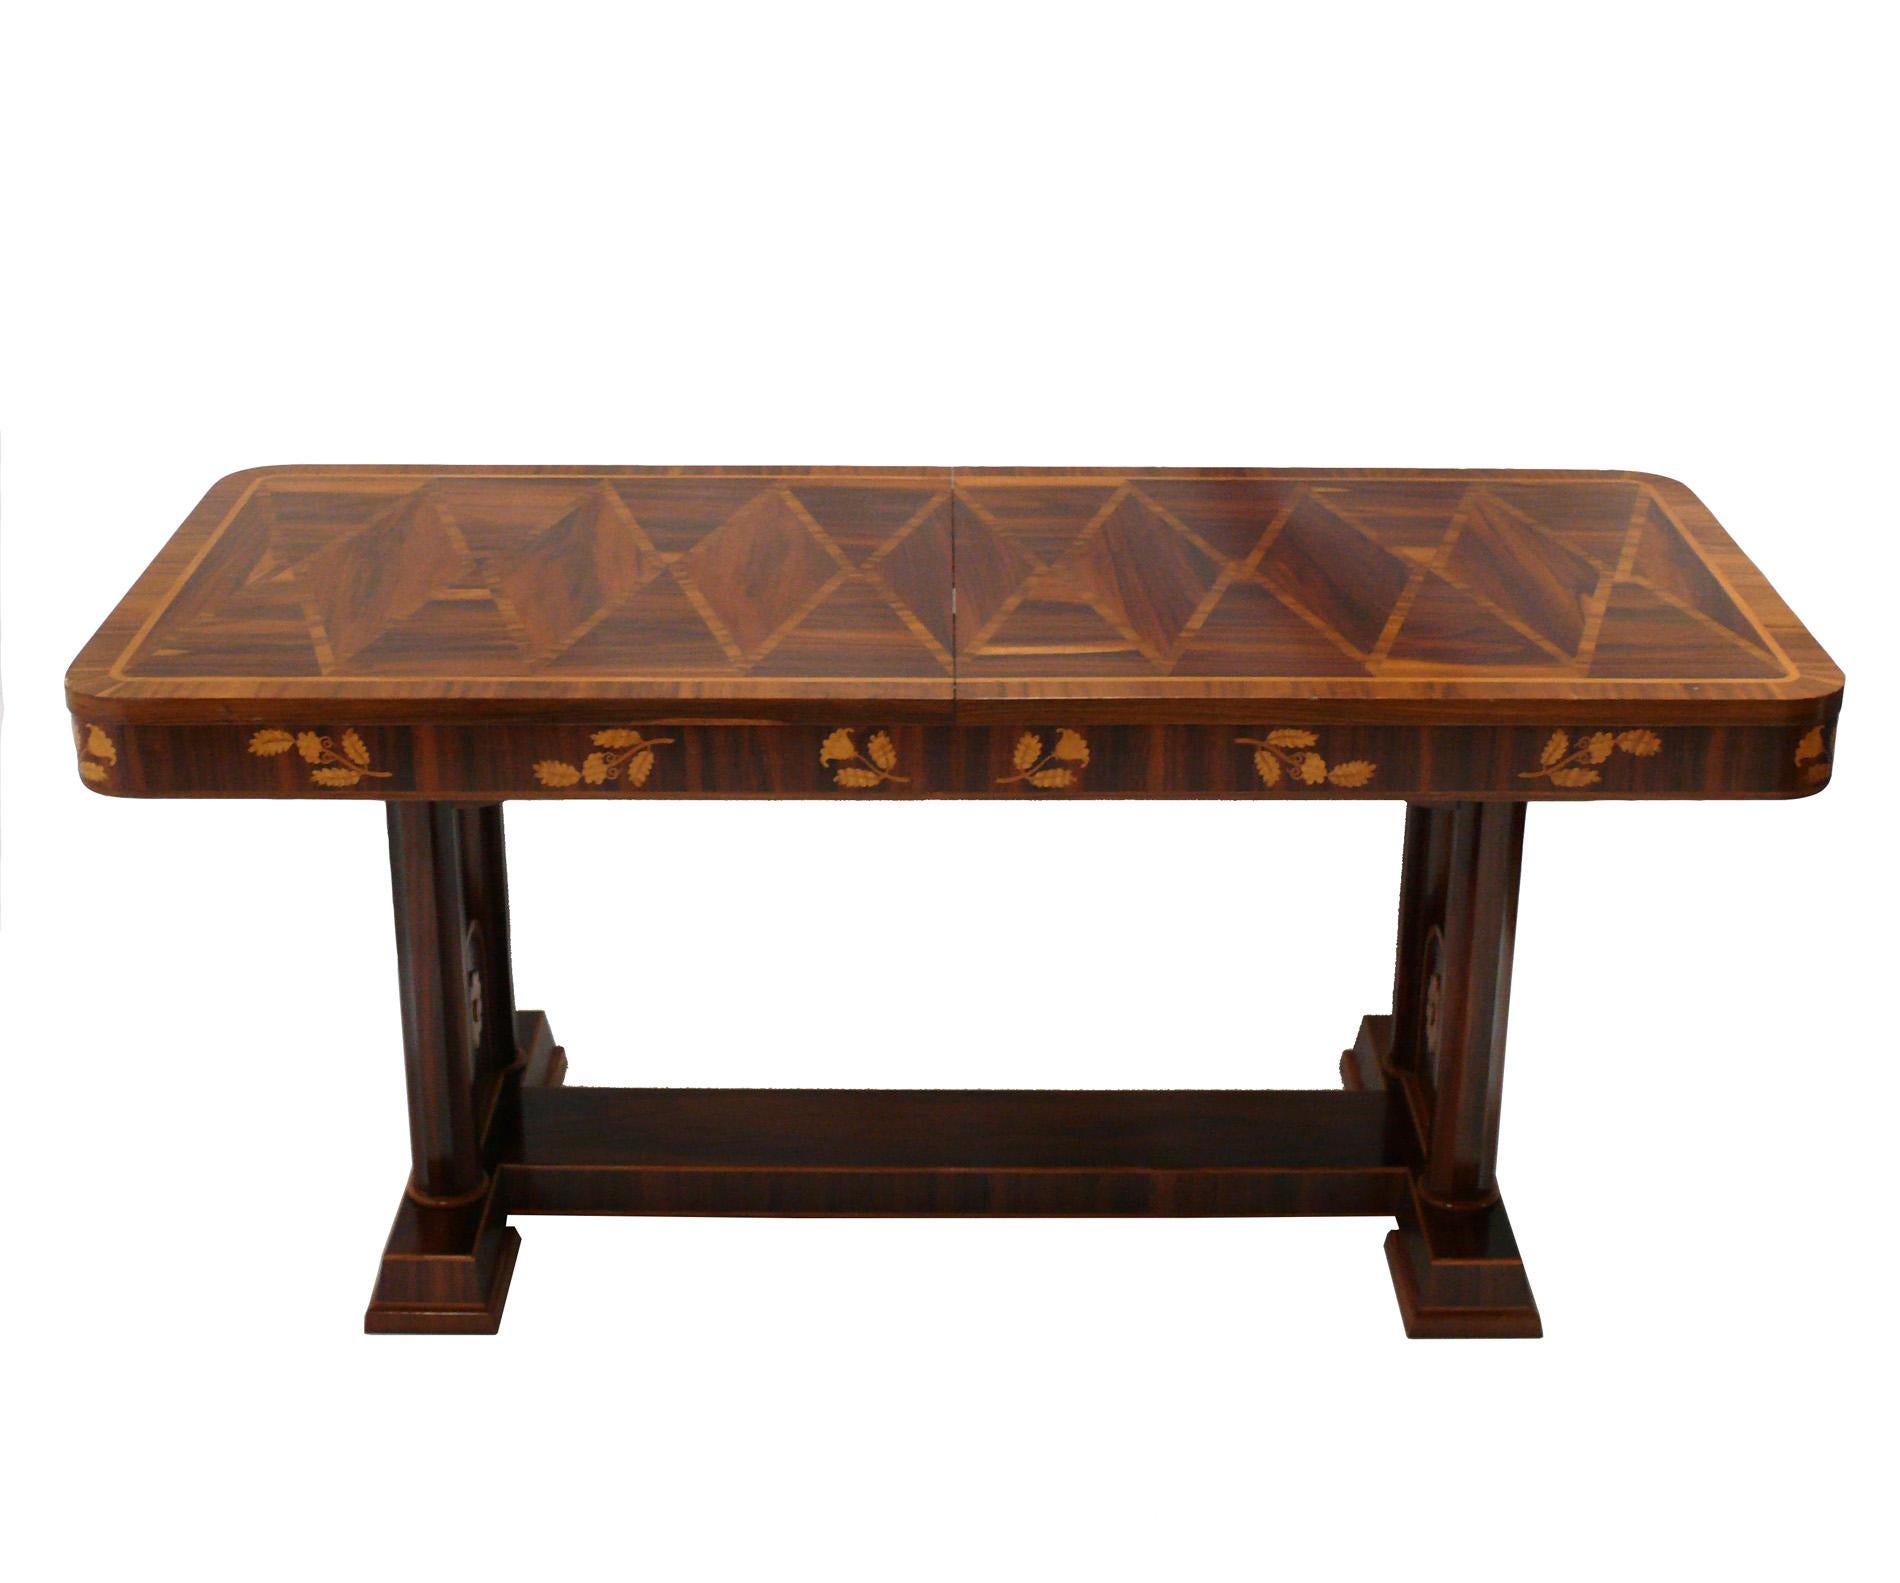 Art Deco marquetry dining or library table, Italian, circa 1930s. This piece is a versatile size and can be used as a dining table, library table, desk, bar, or console table.